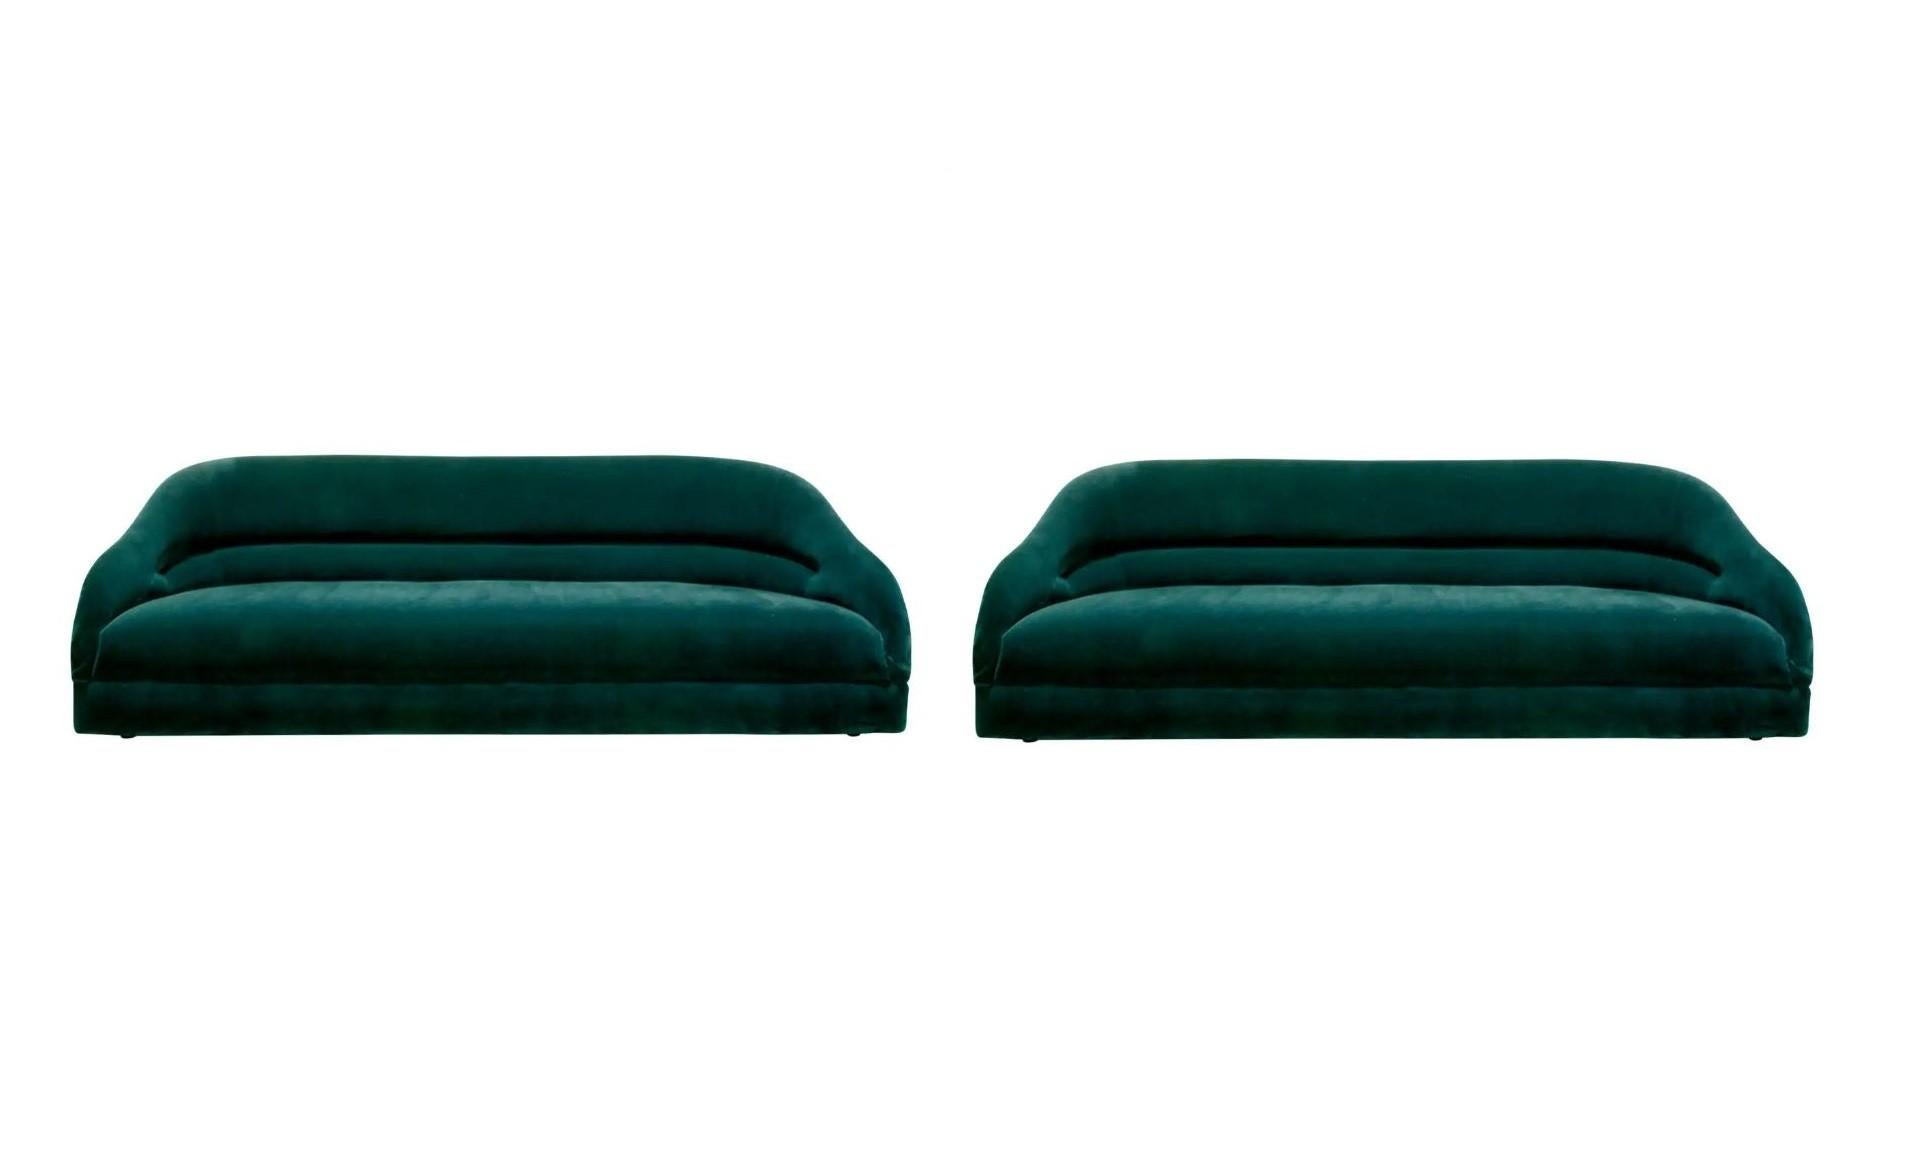 These sofas are absolutely stunning! Classic sofas, model no. 2092, designed by Ward Bennett for Brickel Associates, American, 1970s. A timeless design with deco and modern sensibility. Defined by its curvaceous profile each sofa offers a generous